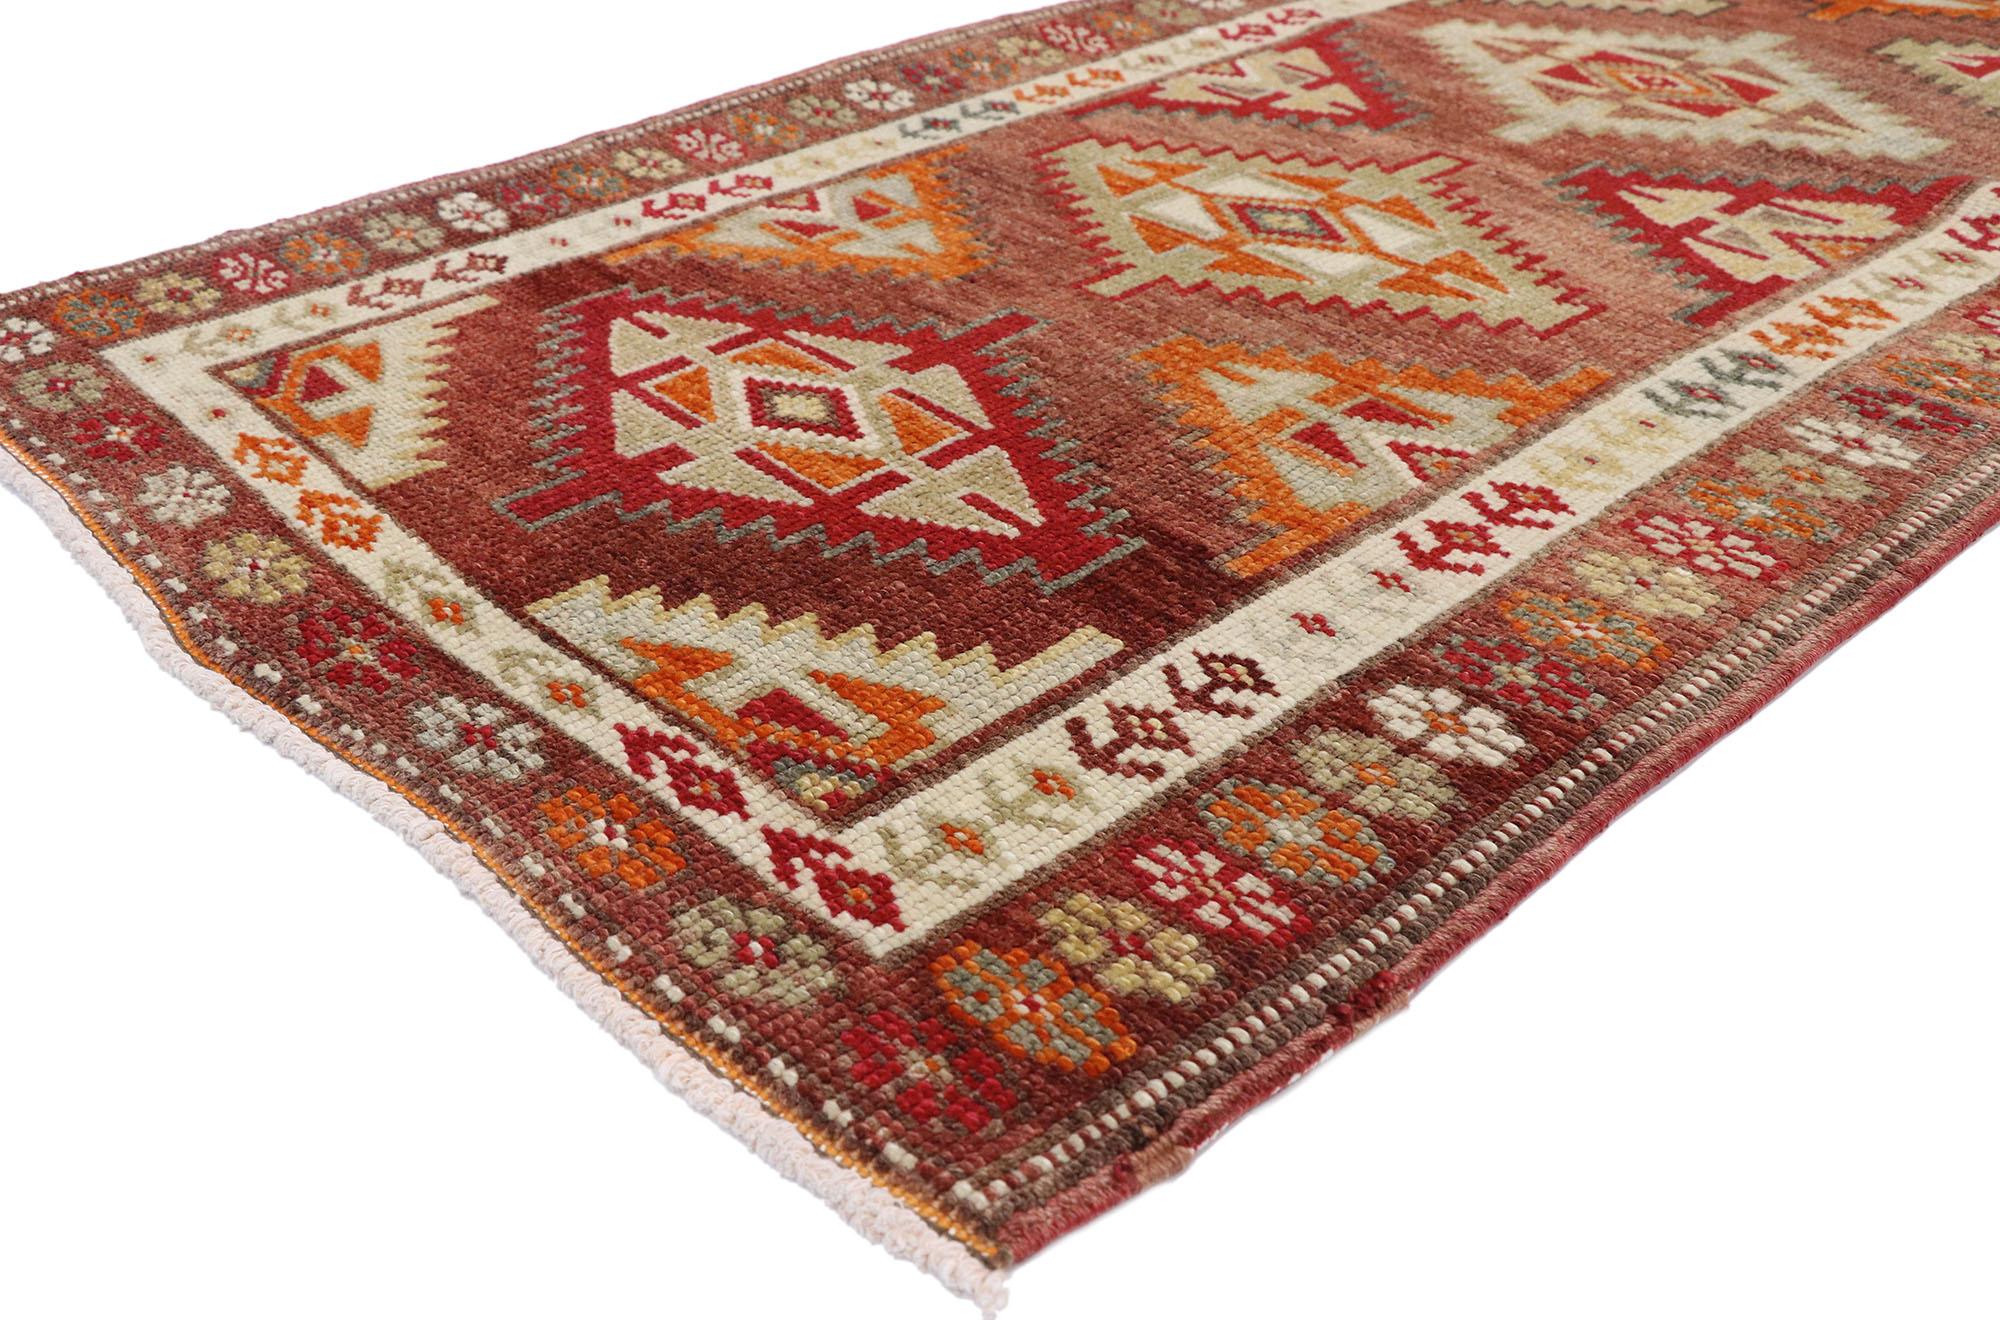 52709, vintage Turkish Oushak runner with warm Santa Fe desert Tribal style. With warm and vibrant colors combined with a bold geometric form, this hand knotted wool vintage Turkish Oushak runner manages to beautifully meld with modern, traditional